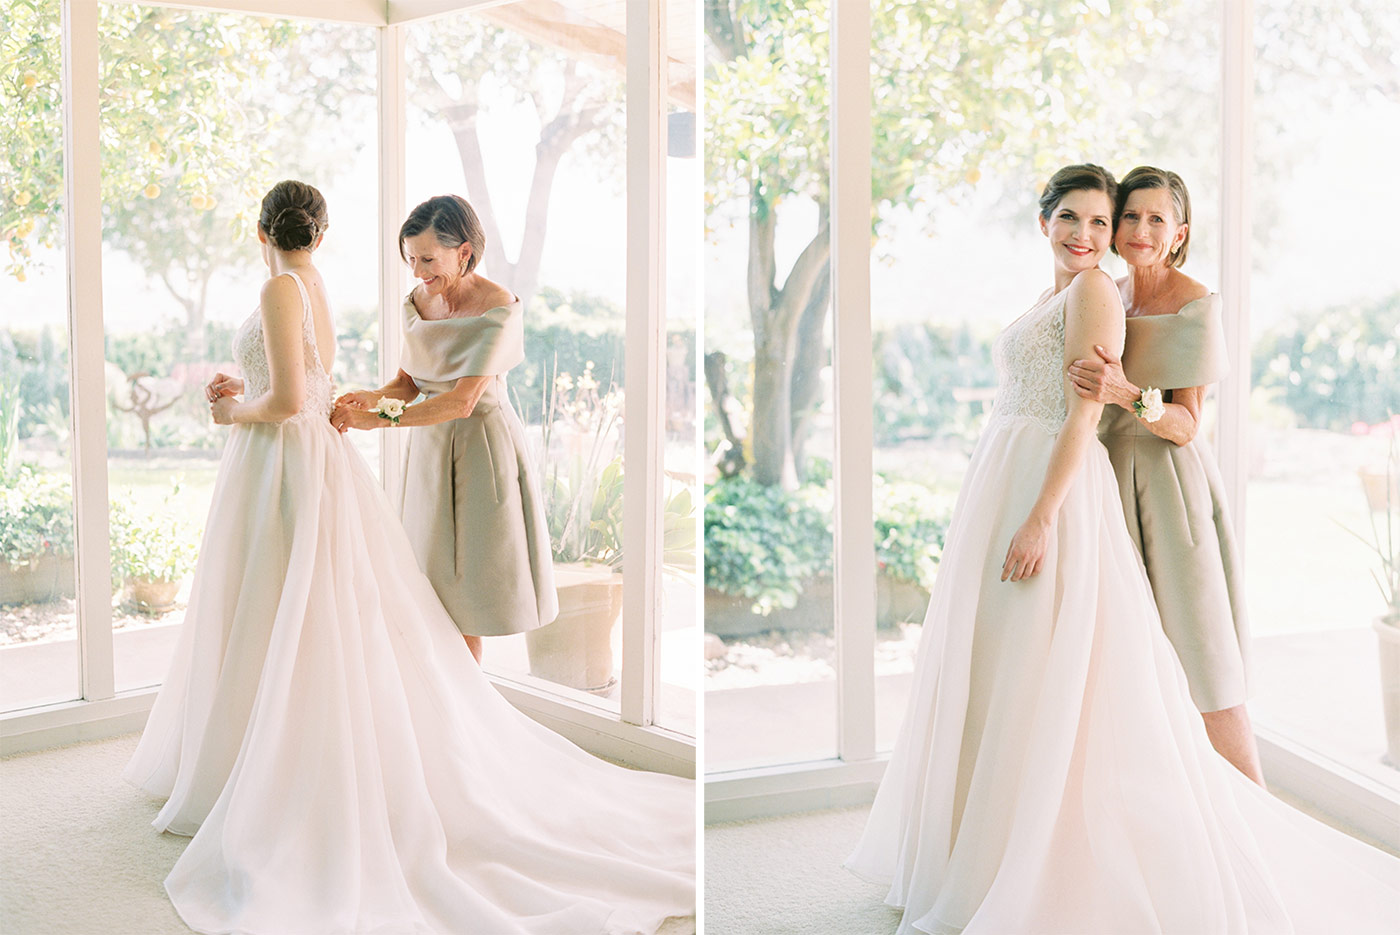 Bride and her Mother zipping up her wedding dress